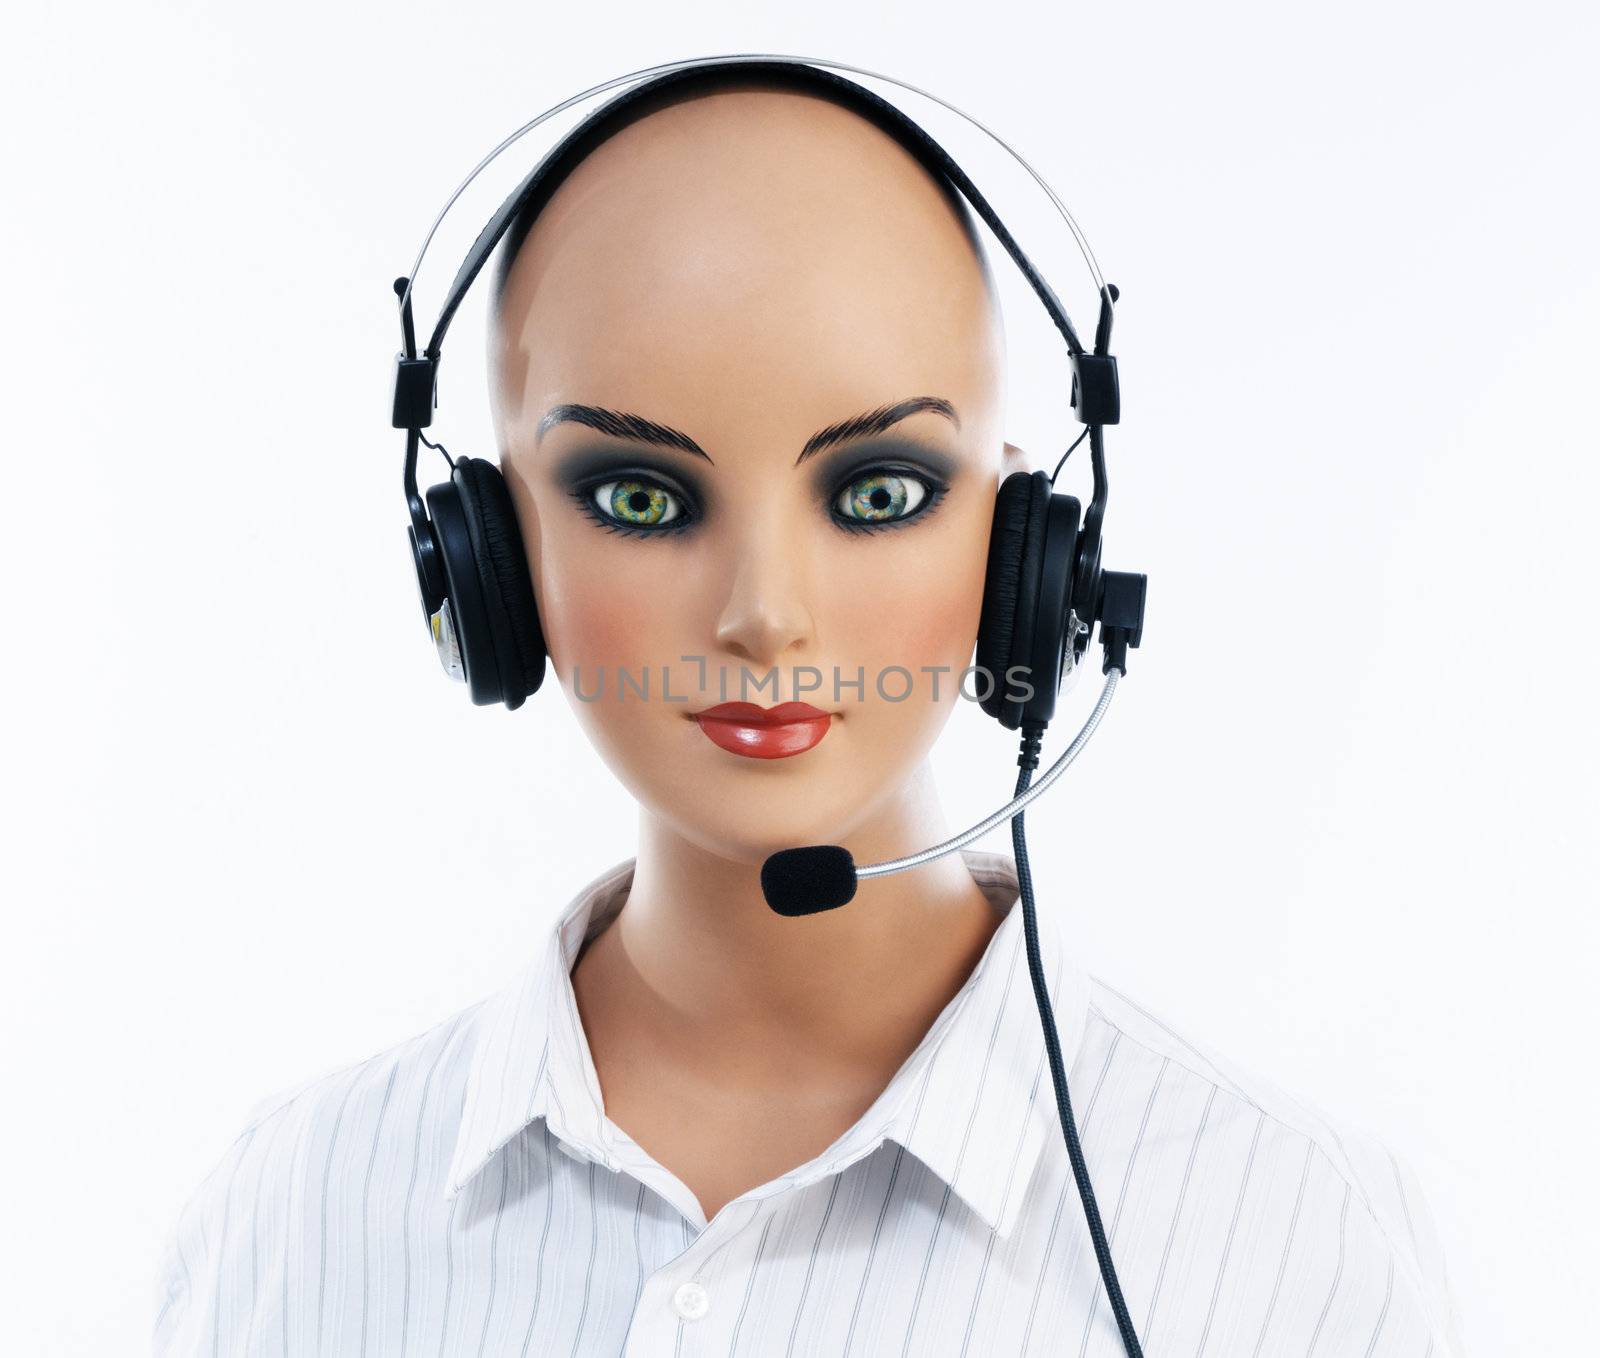 Female mannequin with headset over white background.